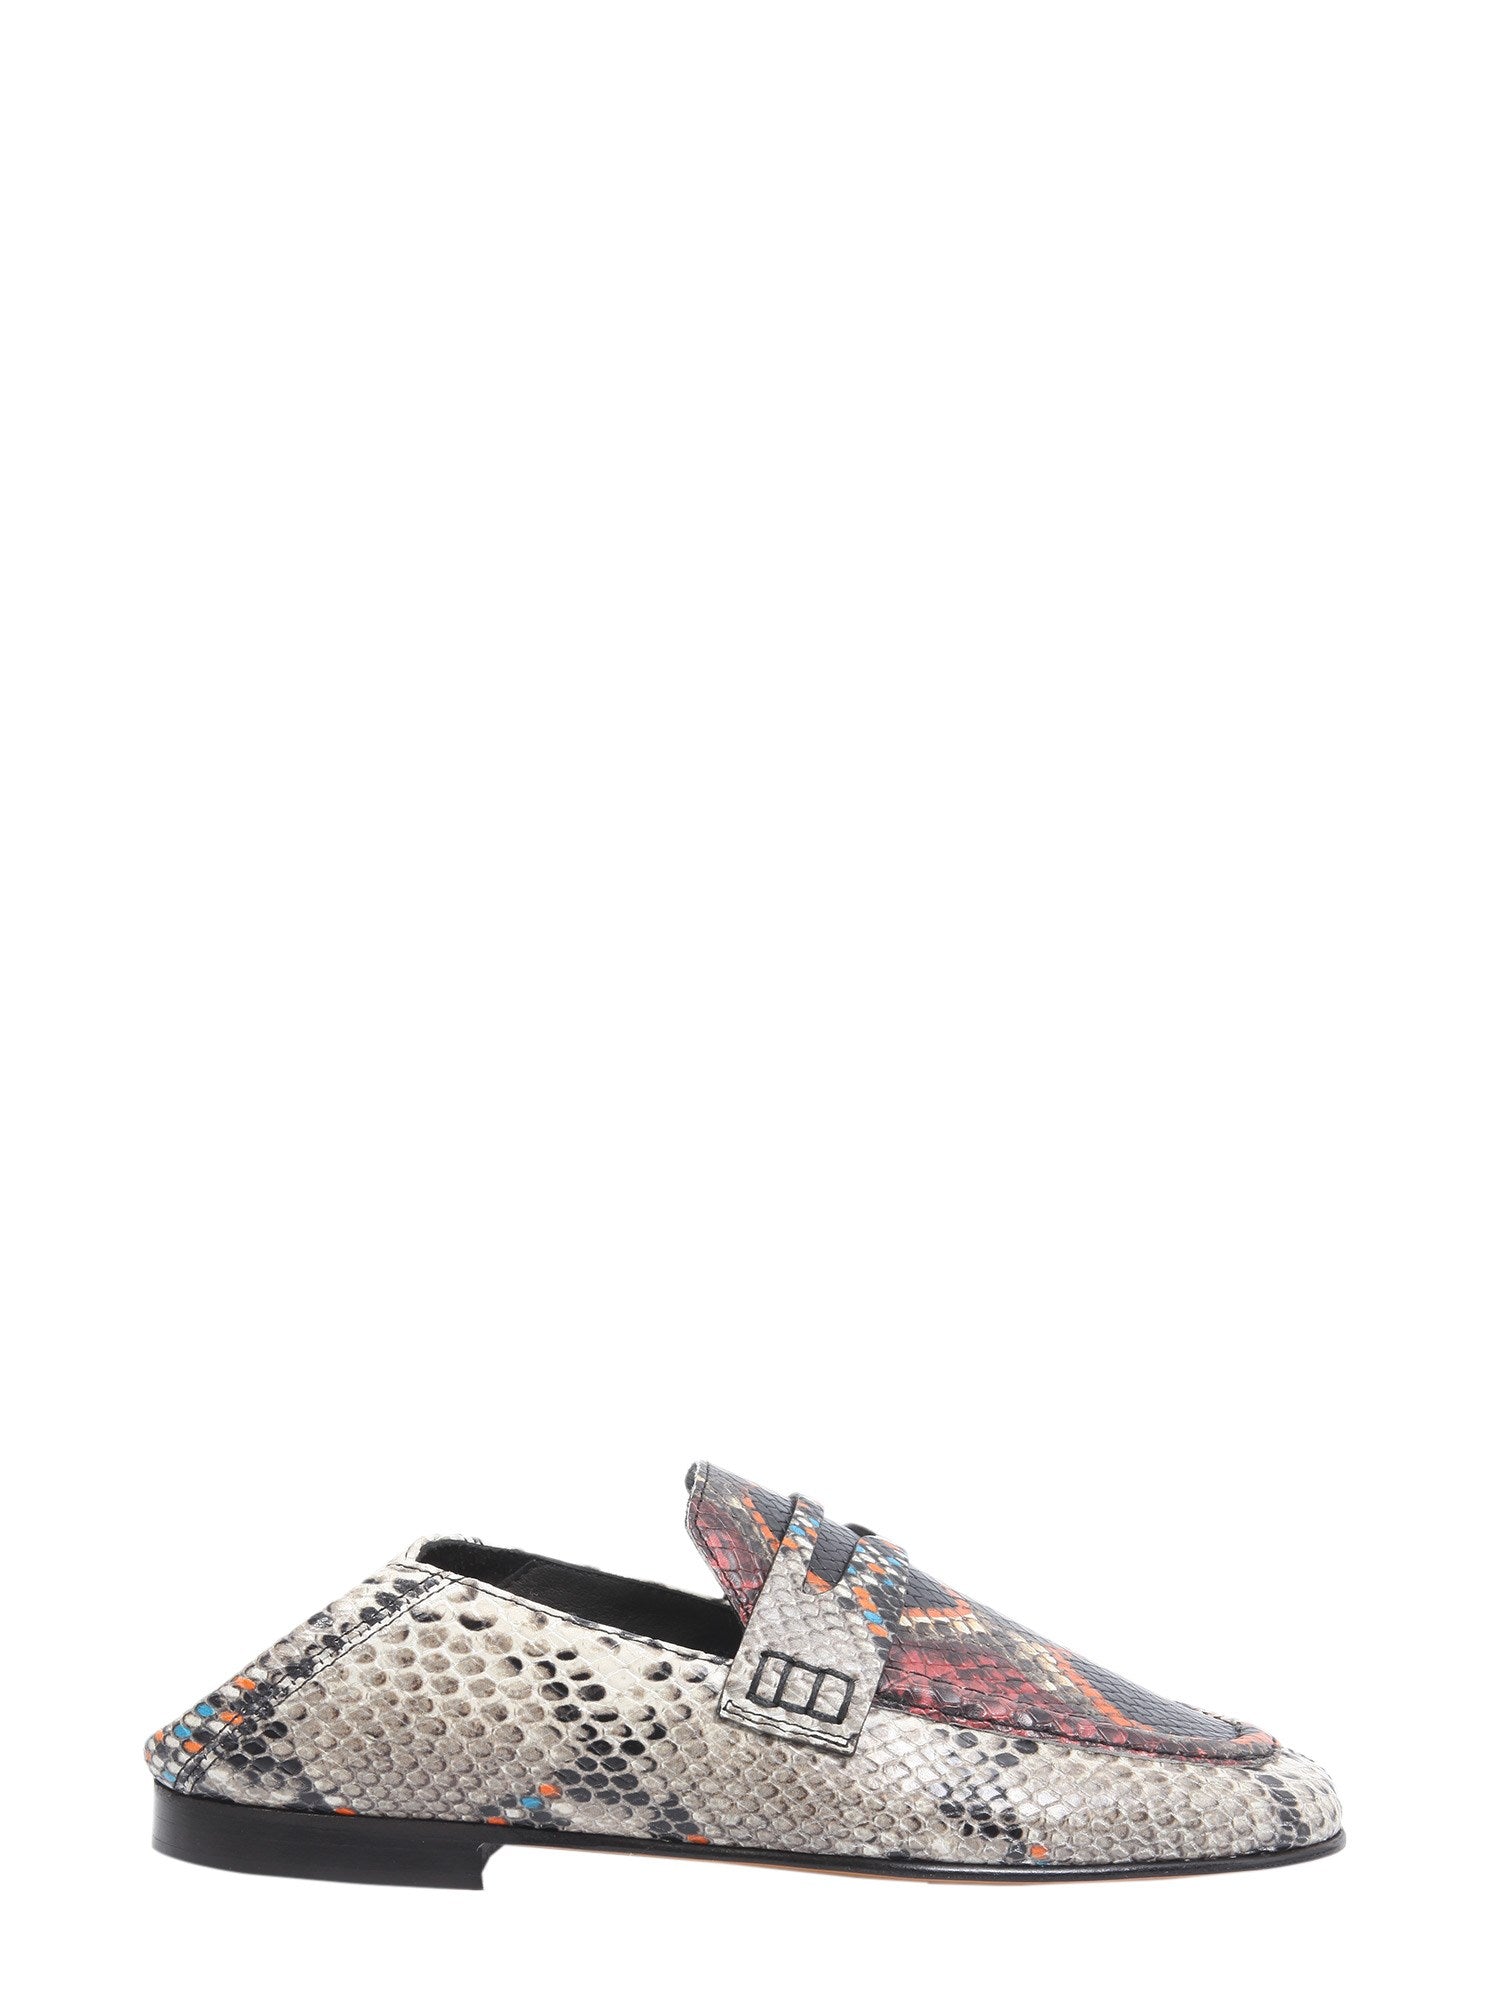 ISABEL MARANT ISABEL MARANT FEZZY STAMPED PENNY LOAFERS